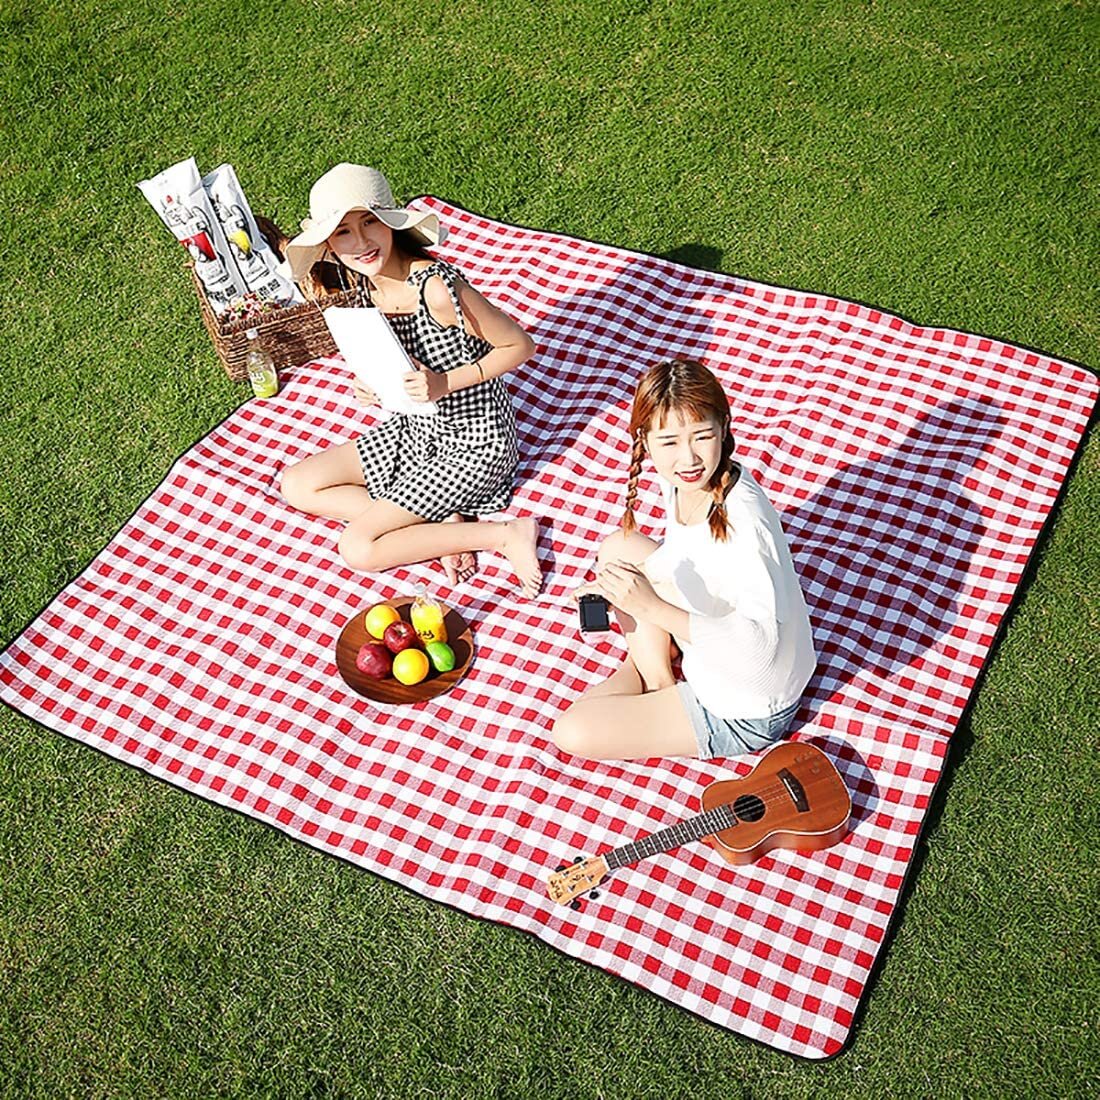 Durable Sand Free Waterproof Beach/Picnic Blanket Quick Dry Set  9 ft x 7 ft 